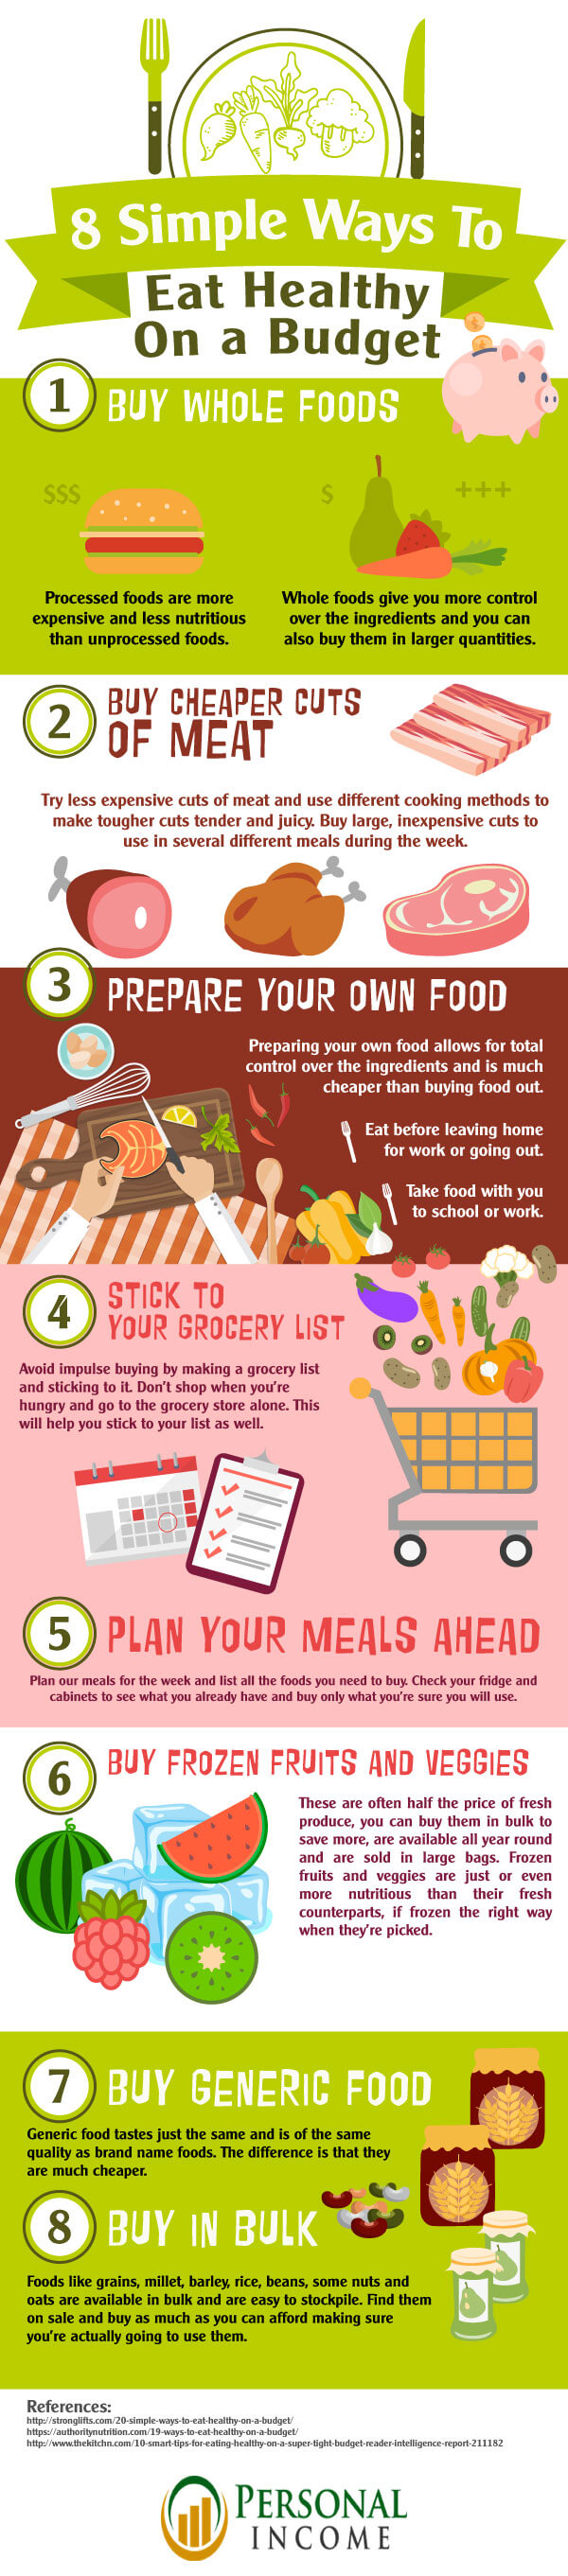 8-Simple-Ways-To-Eat-Healthy-On-a-Budget.jpg